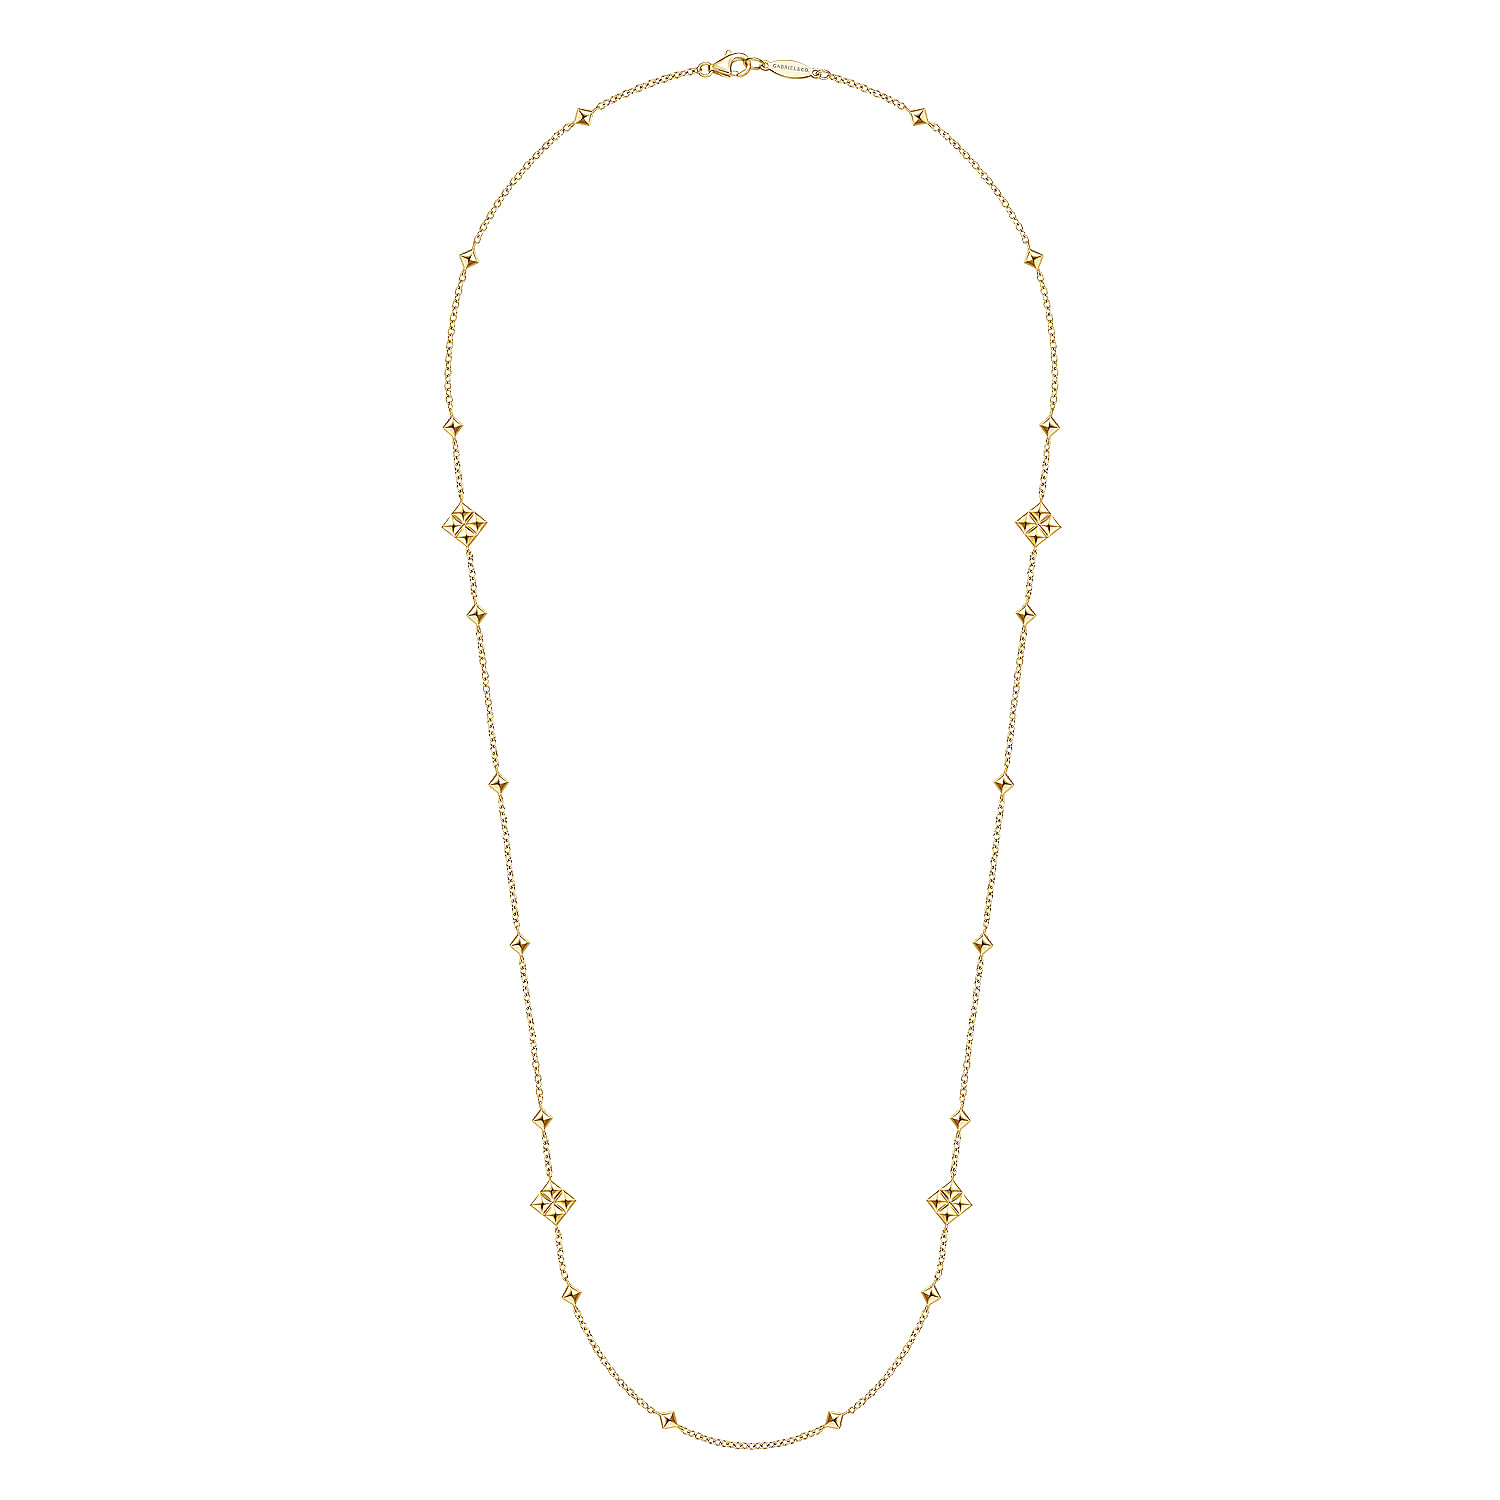 24 inch 14K Yellow Gold Pyramid Quatrefoil Station Necklace